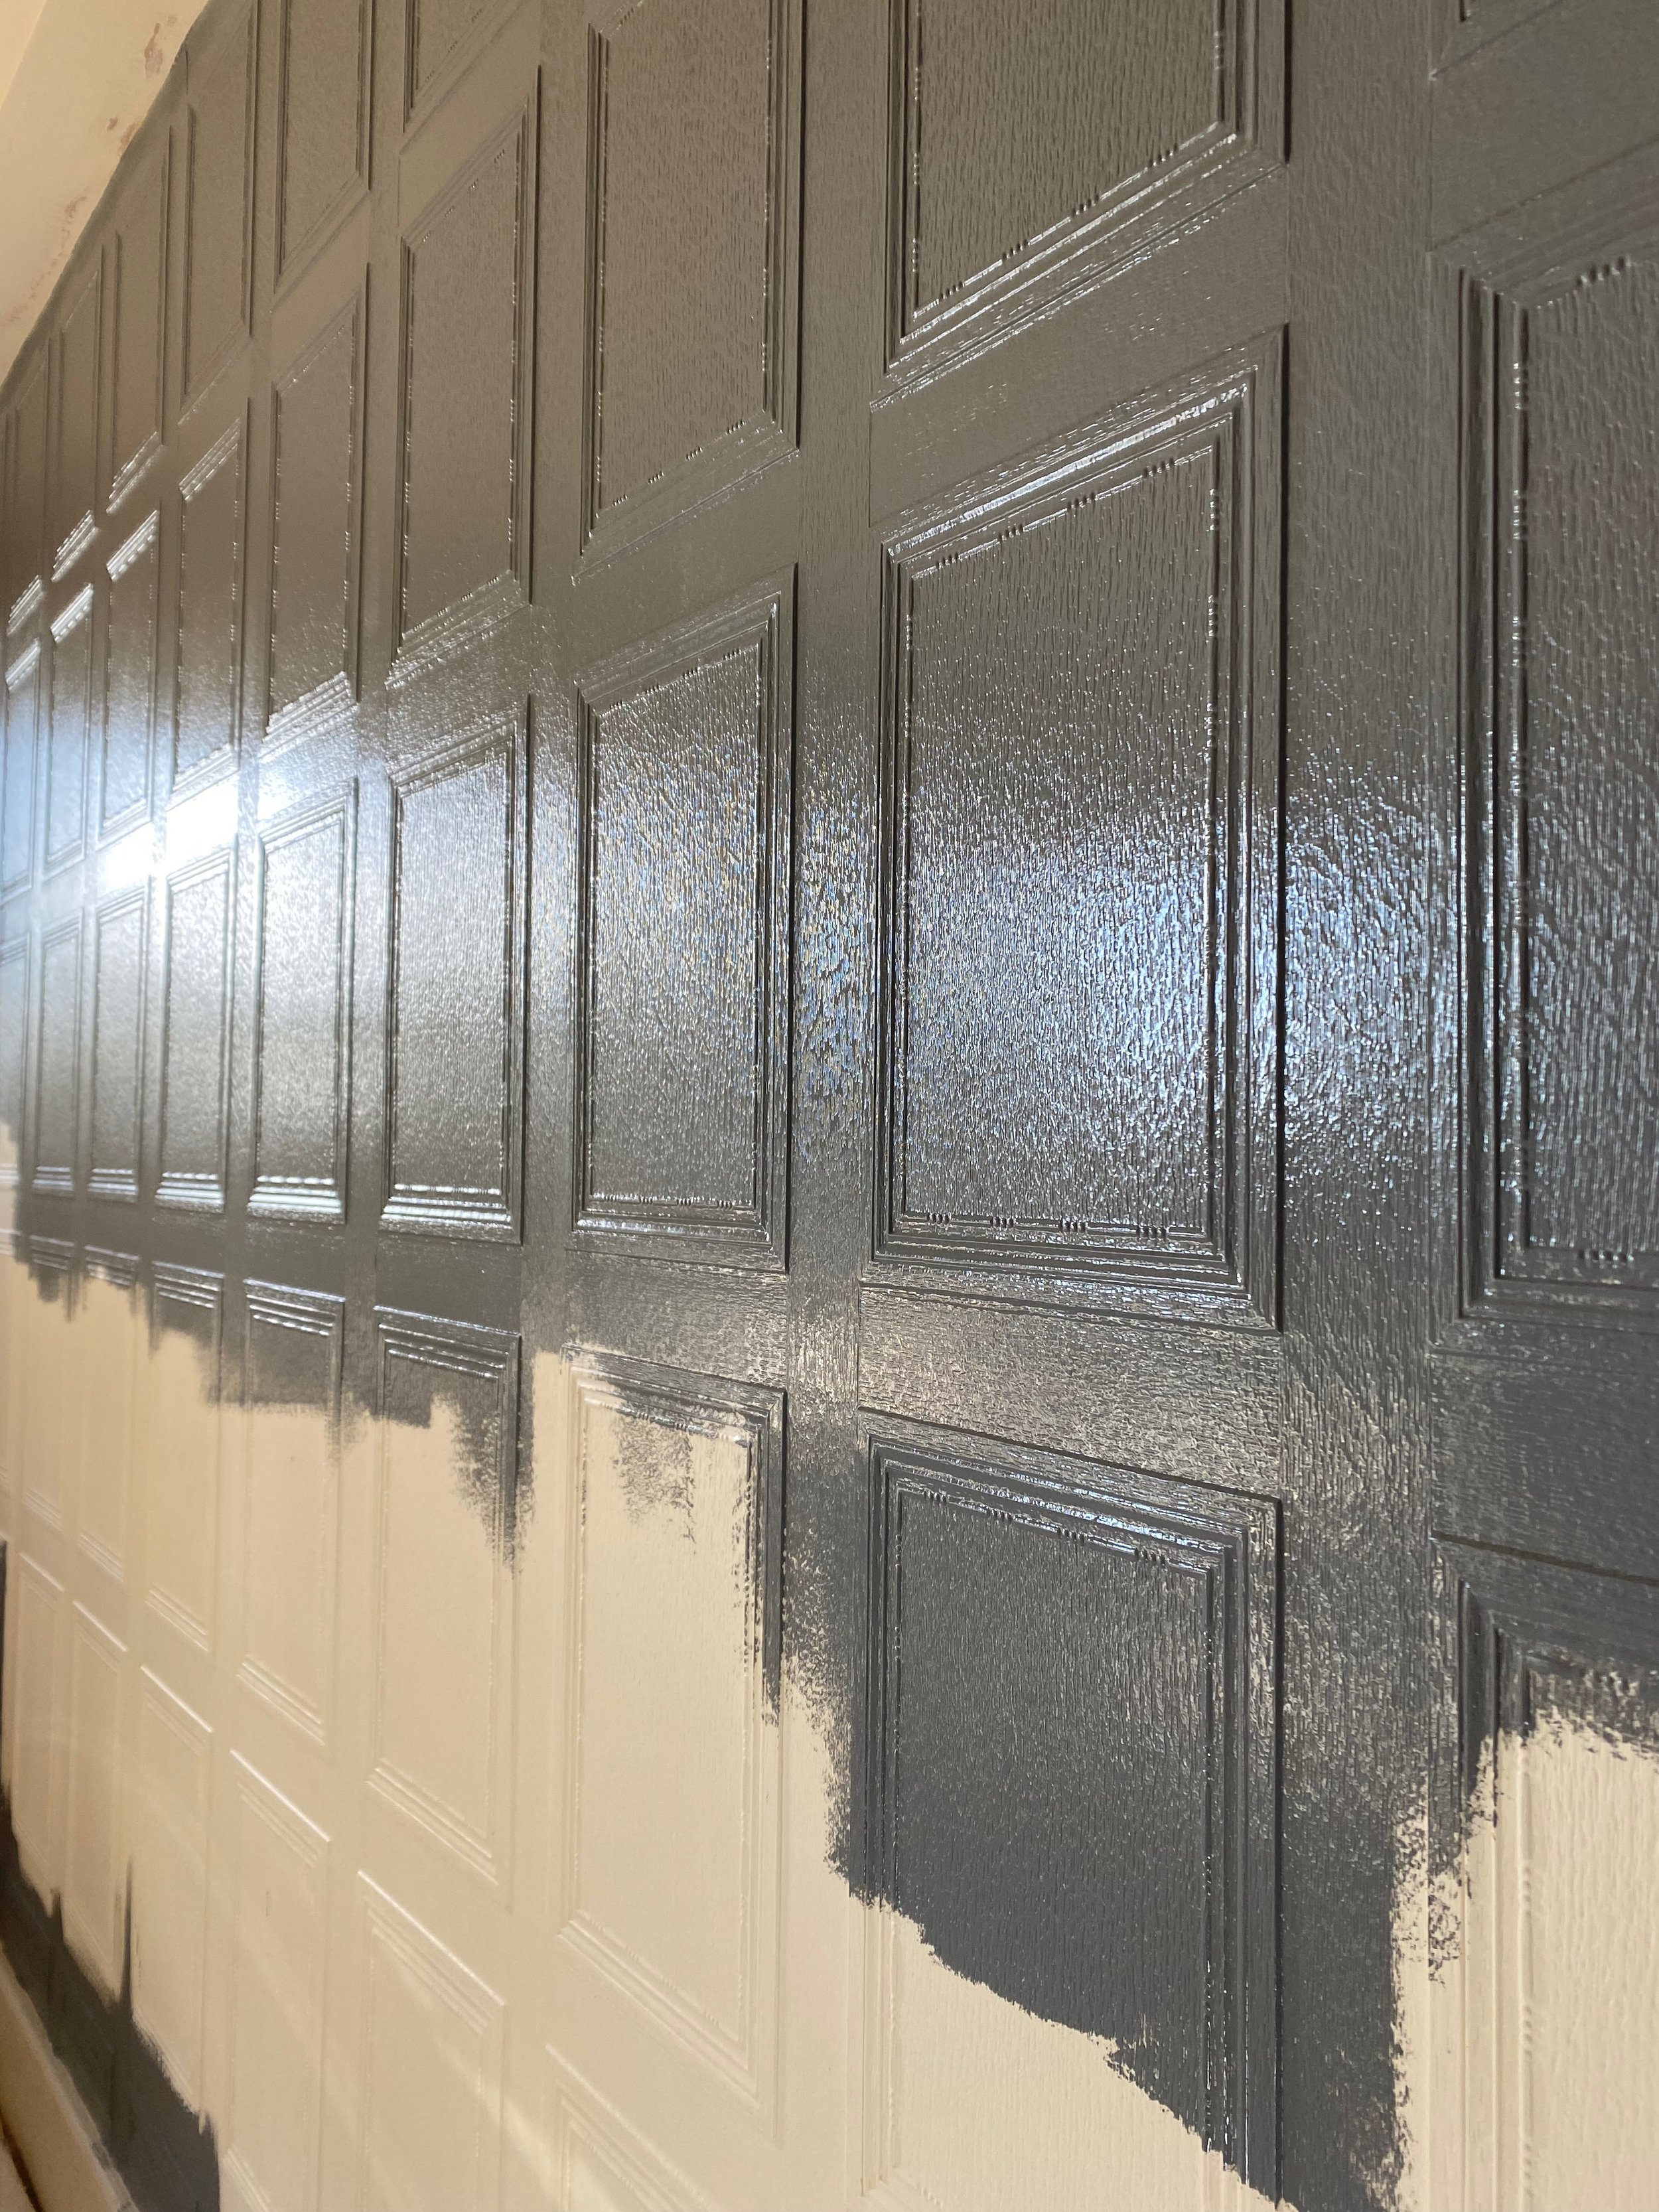 Lincrusta panelling painted after installation